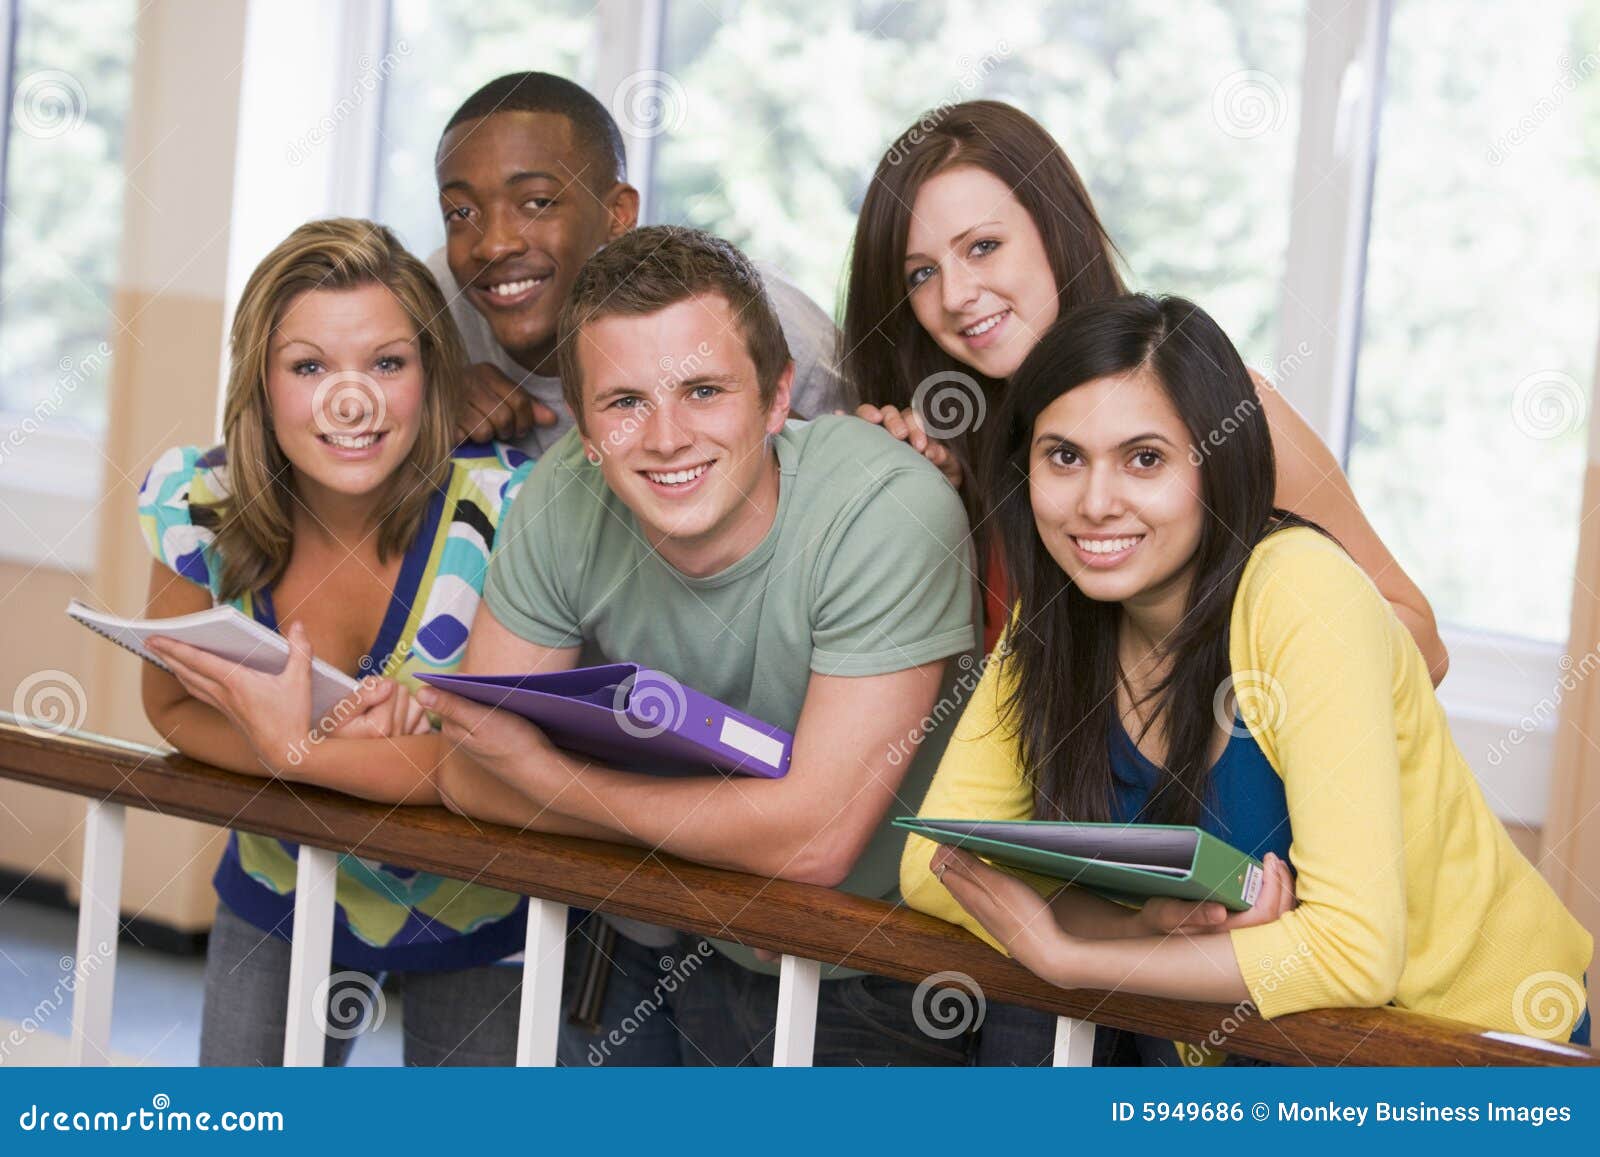 group of college students leaning on banister